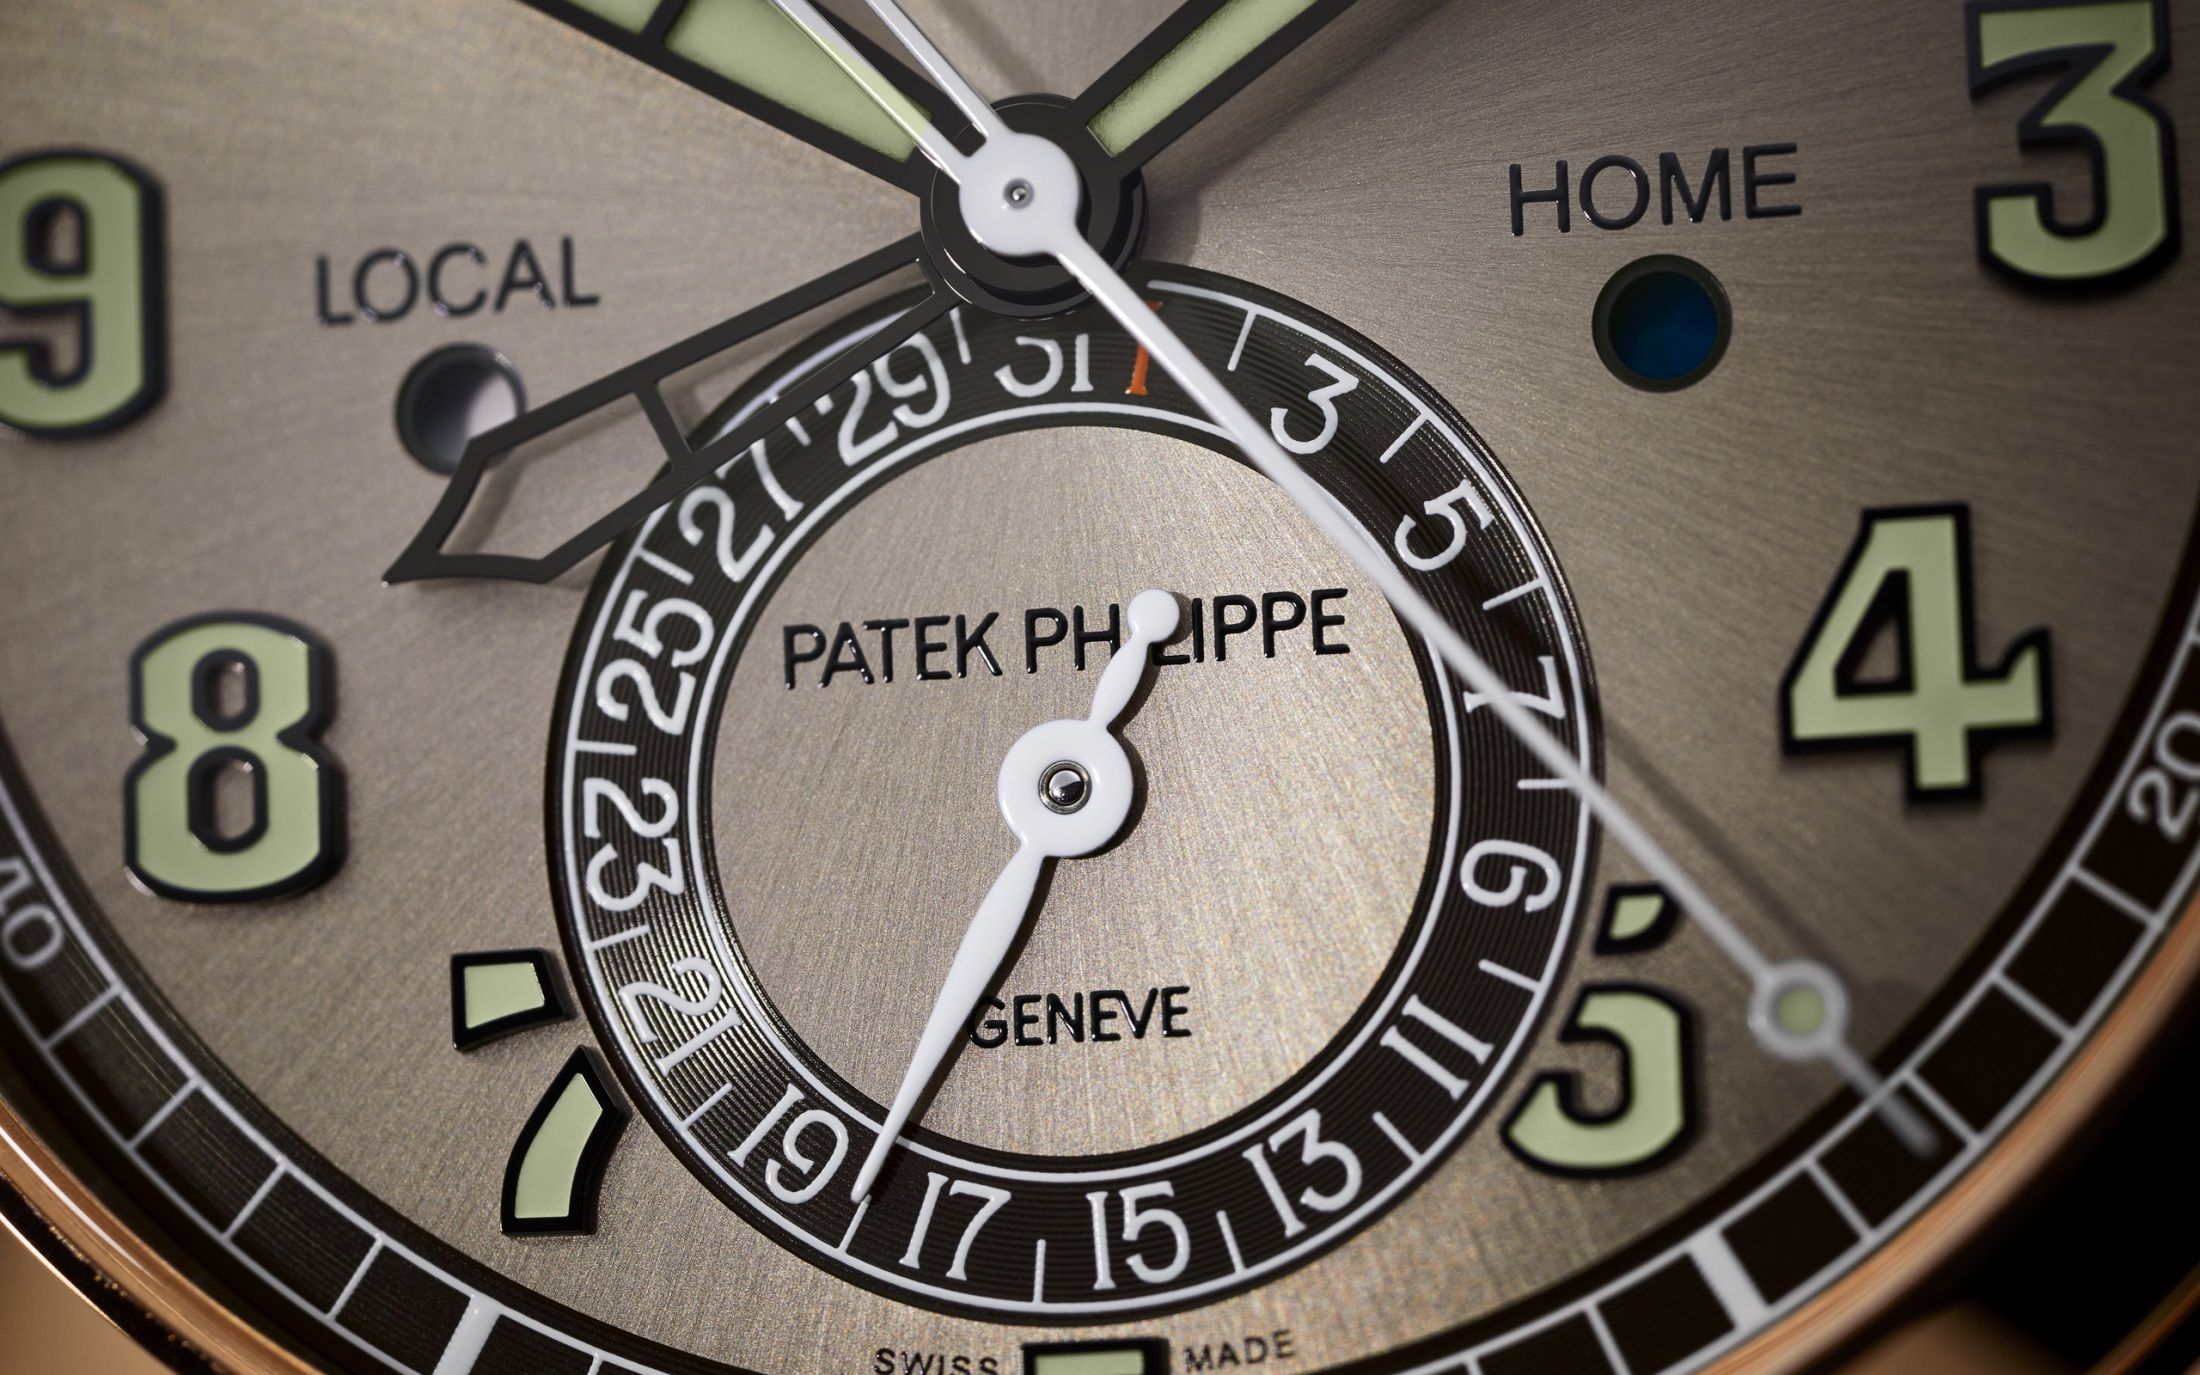 The dial offers contrasting finishing and color treatments